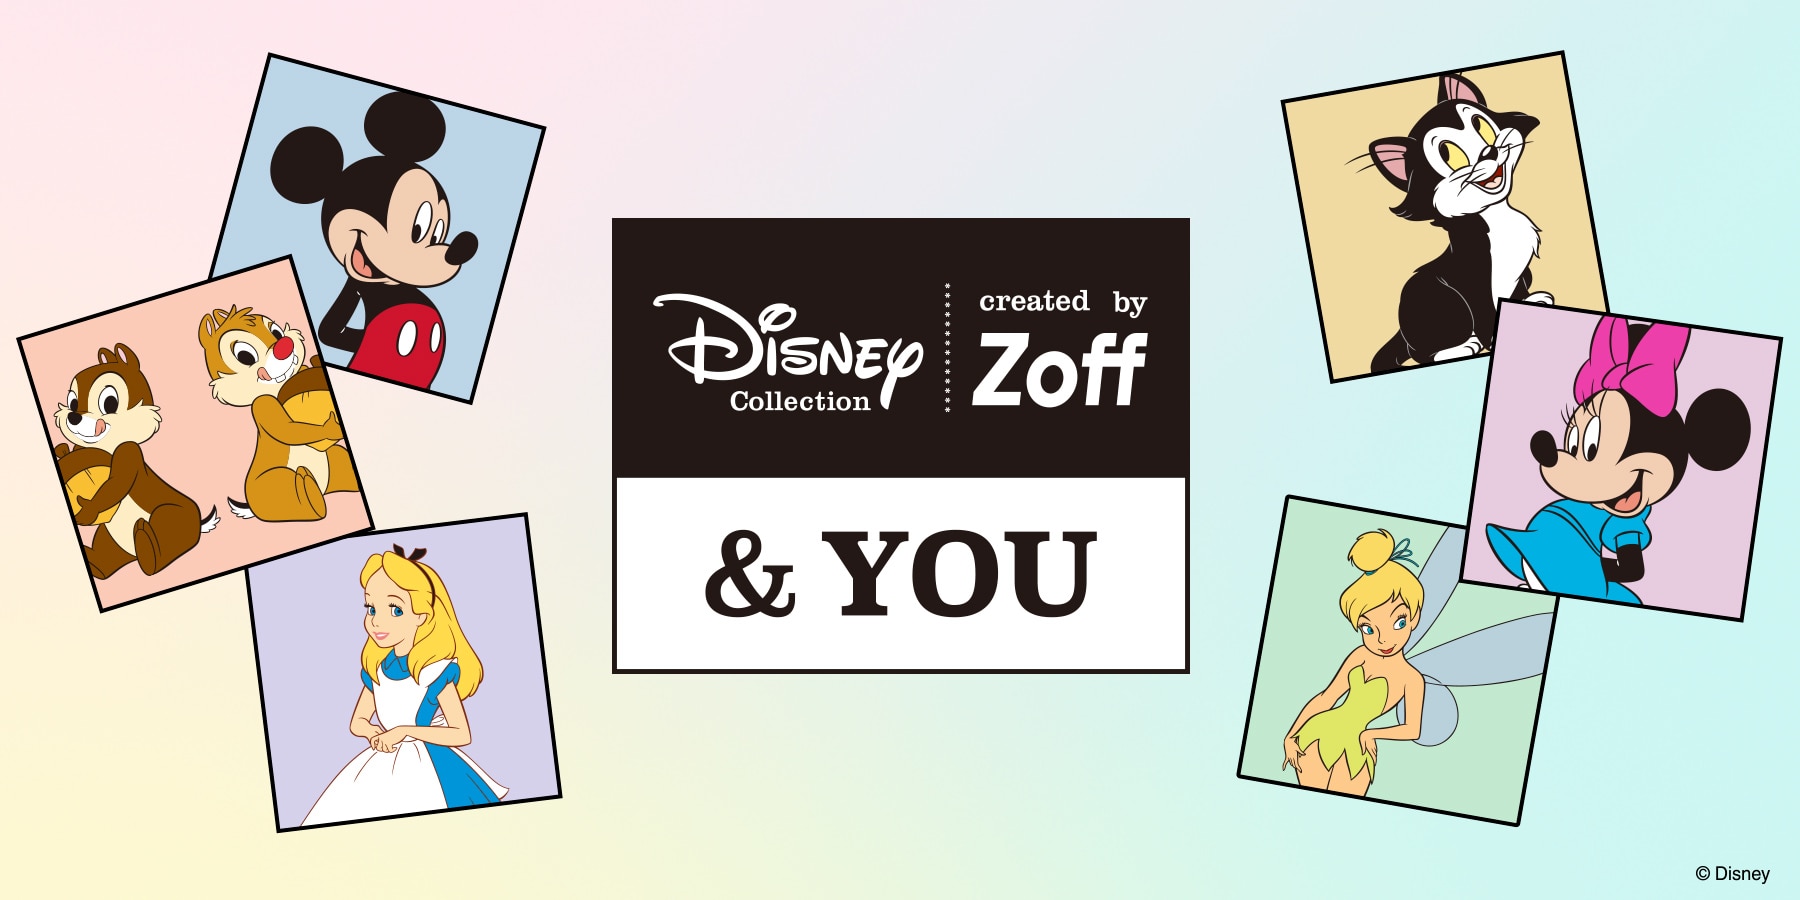 DISNEY Collection created by Zoff(ディズニー・コレクション